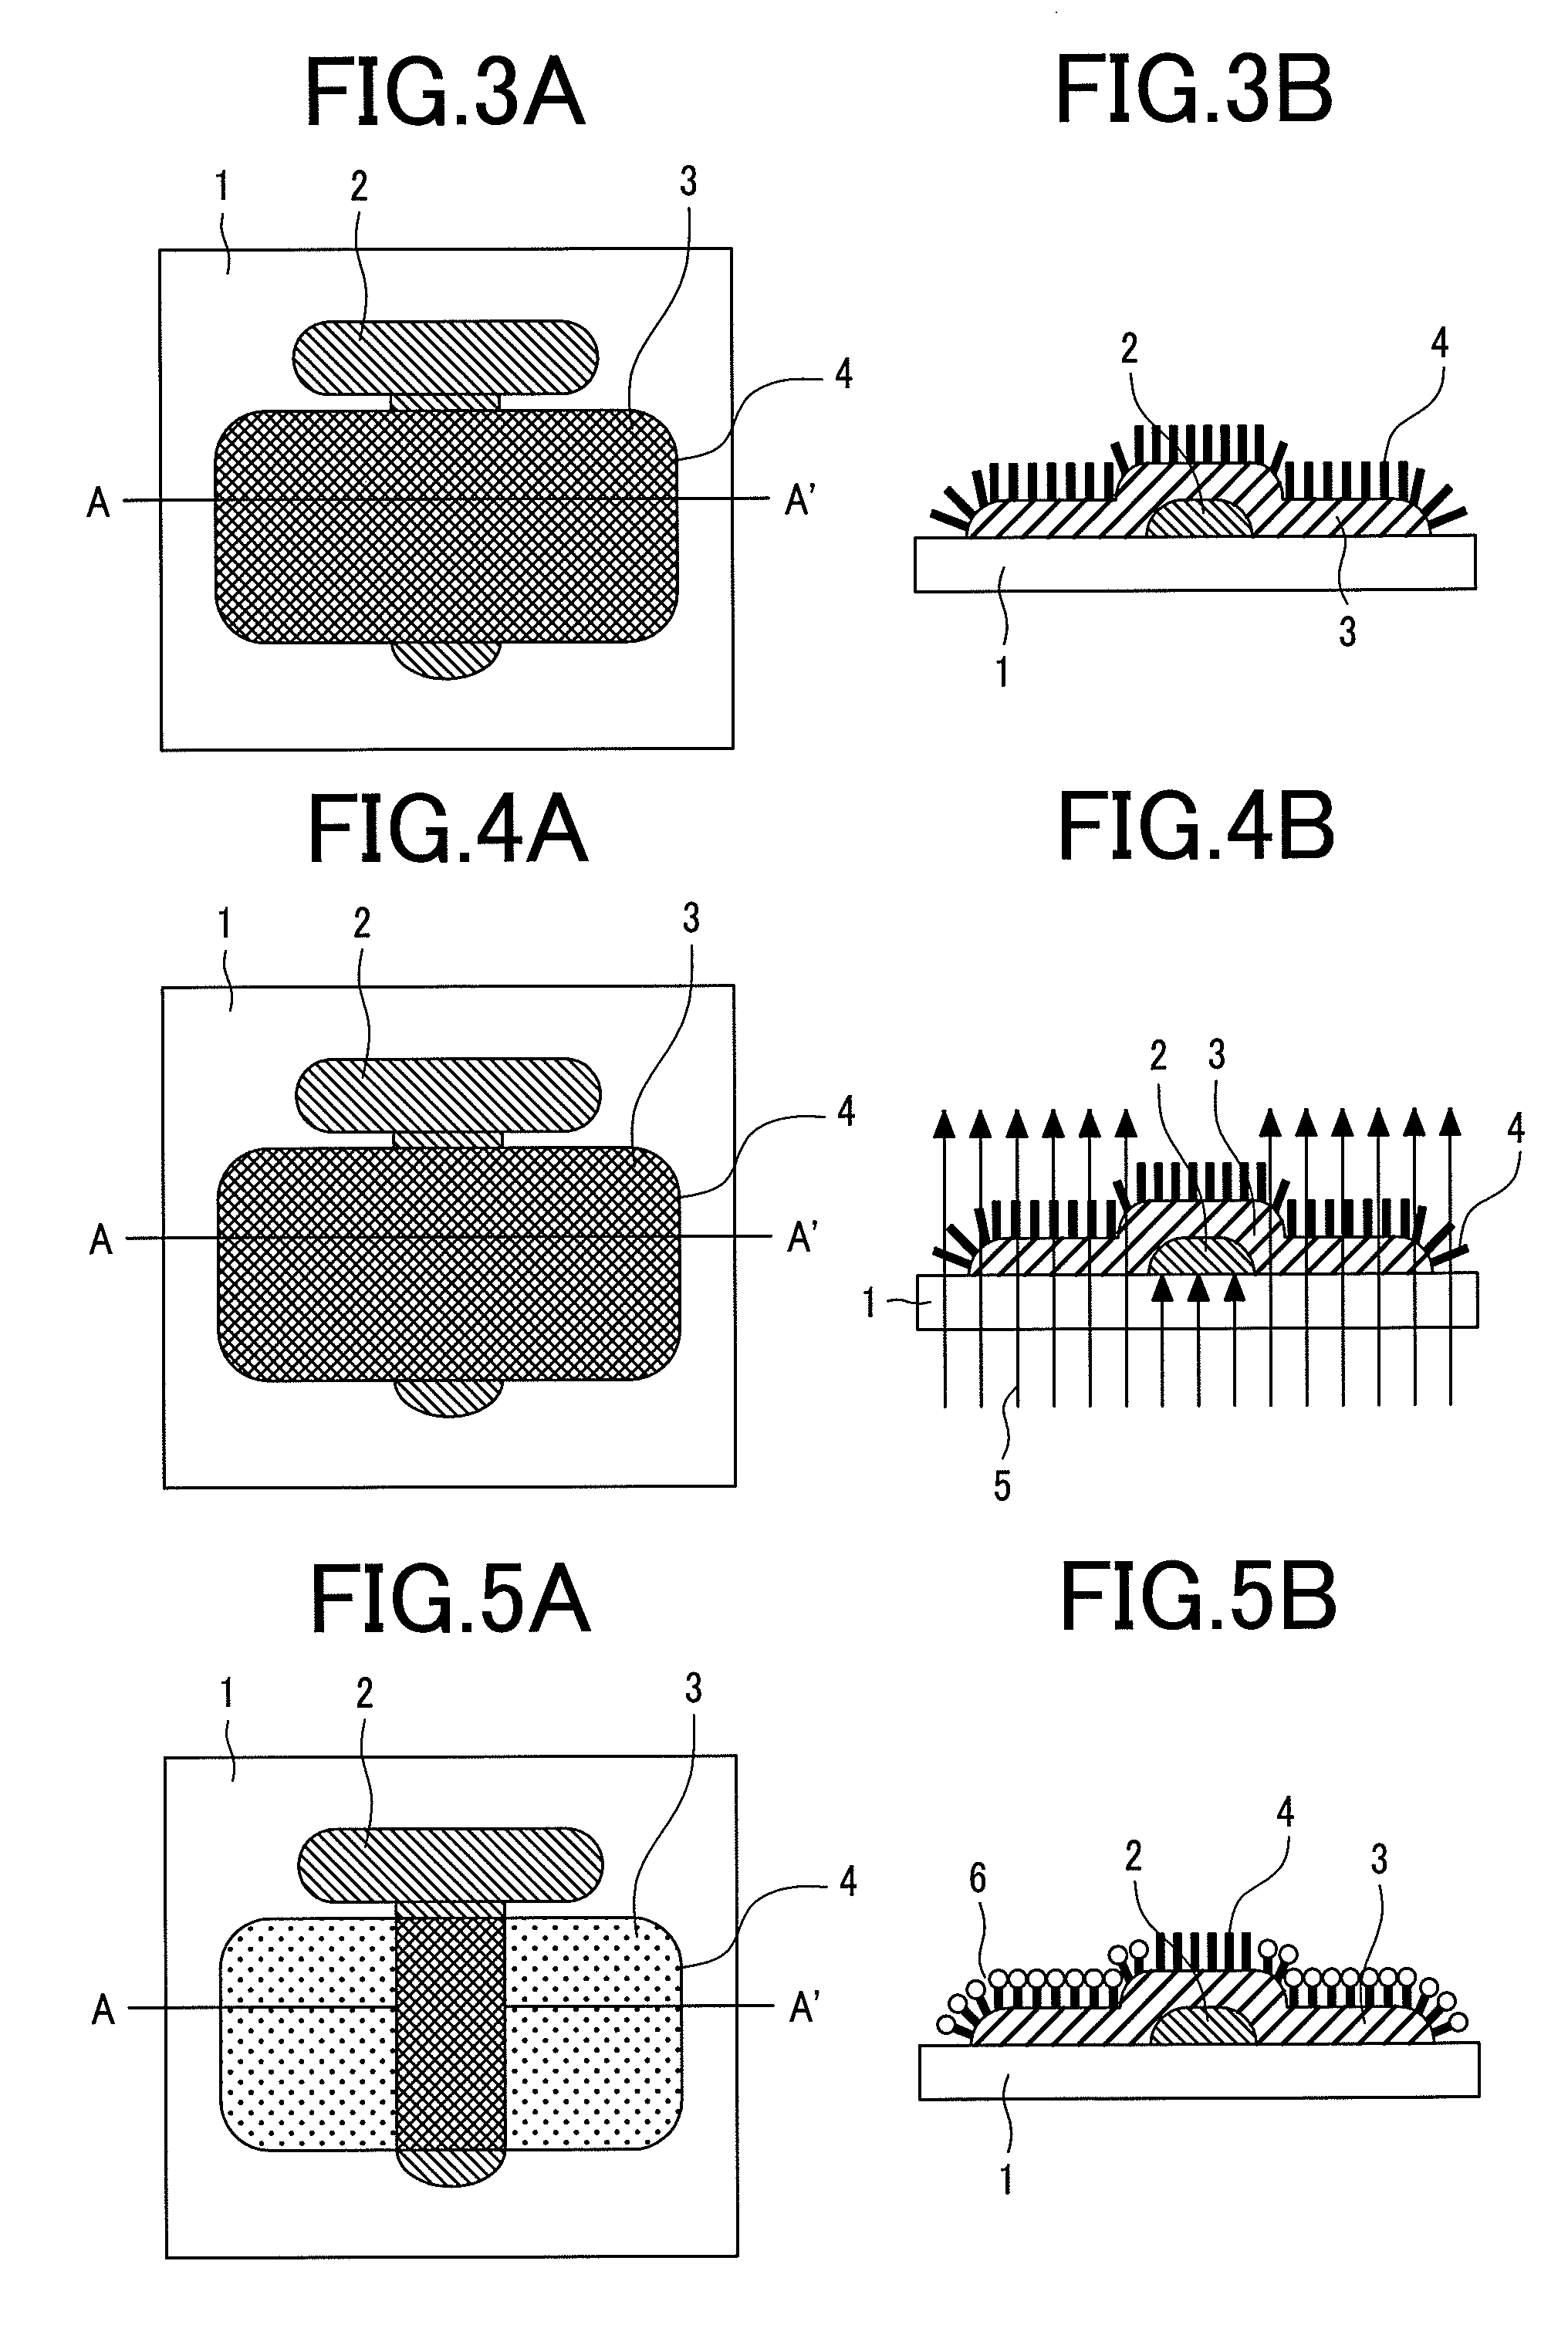 Method of manufacturing a semiconductor device having an organic thin film transistor